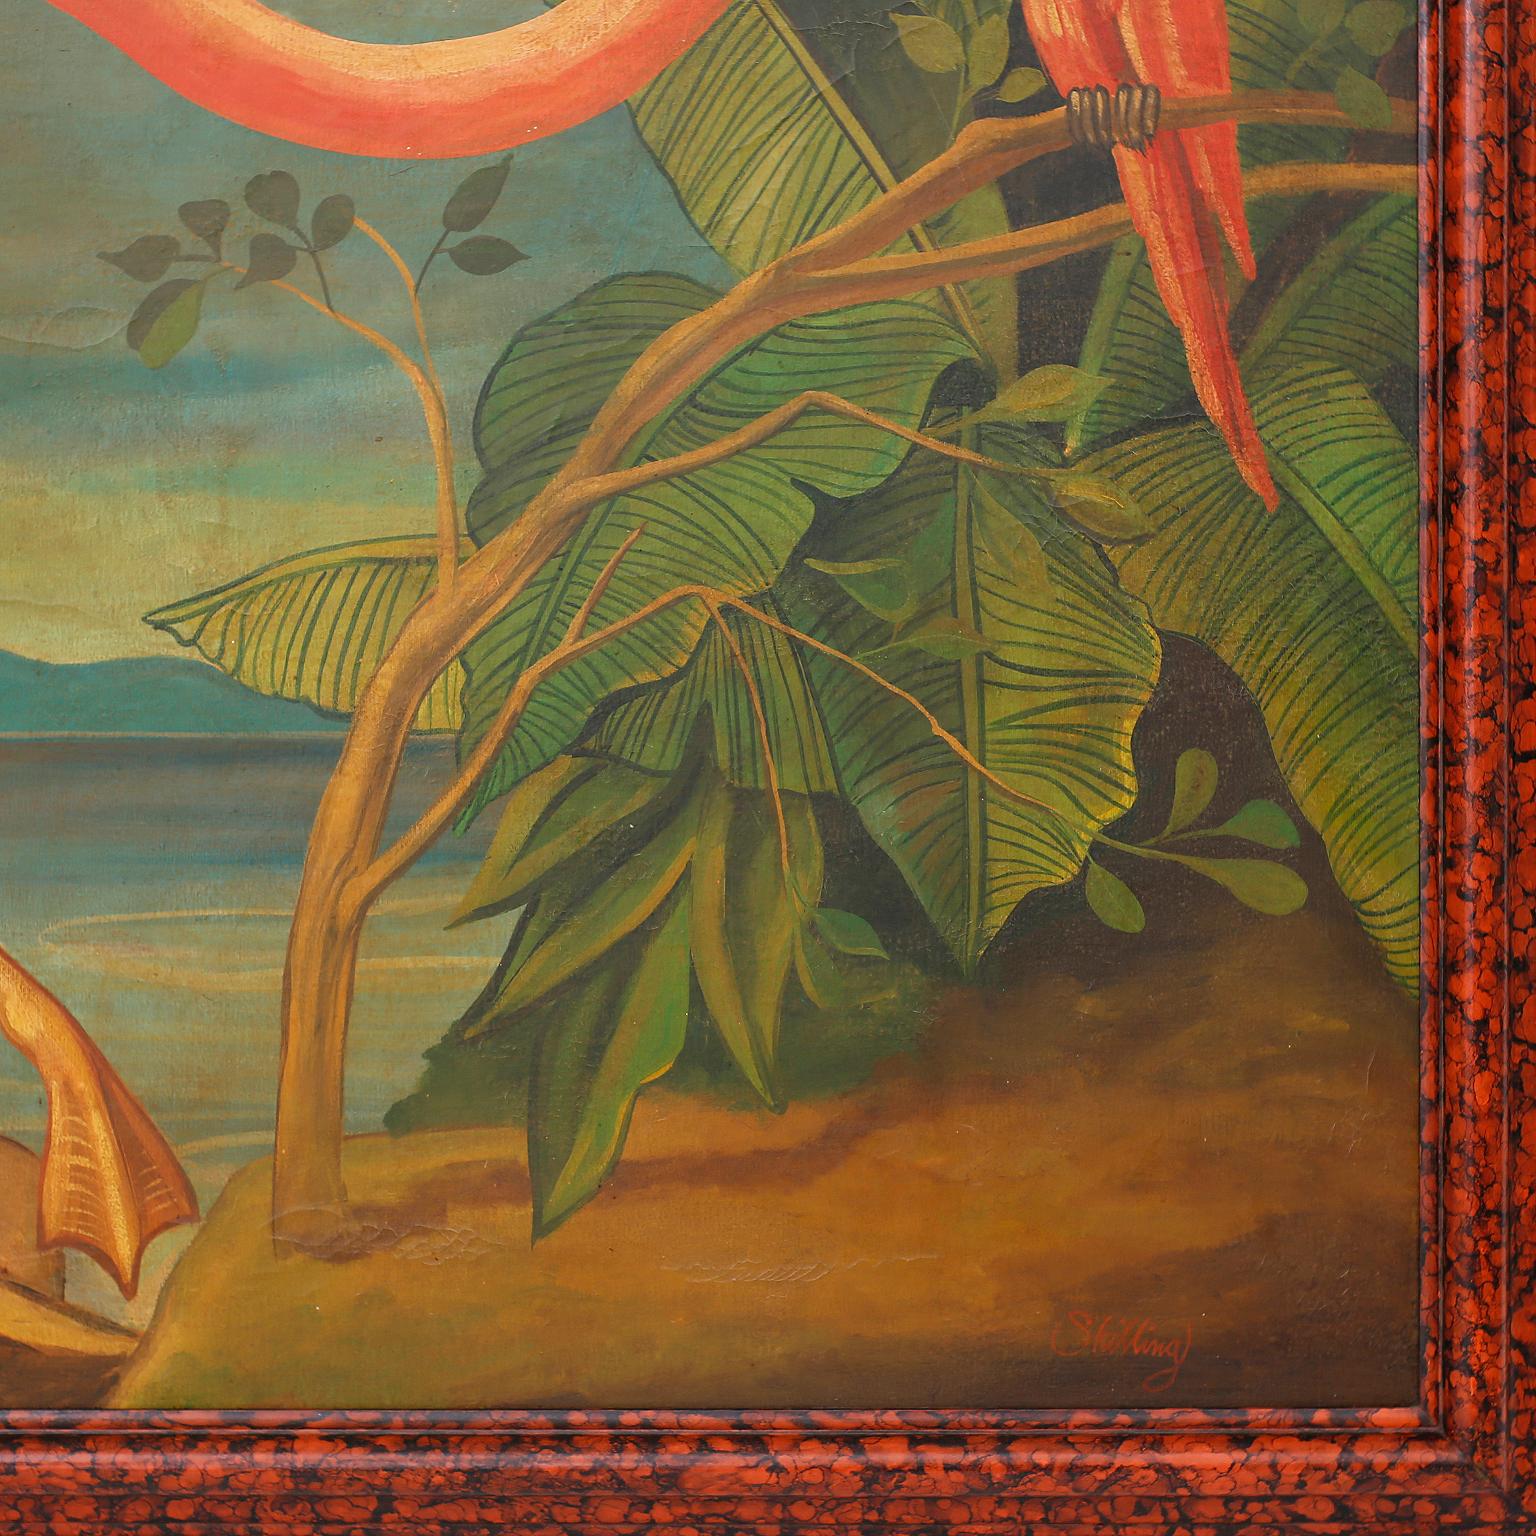 Oil painting on canvas of a flamingo and a parrot in a tropical setting executed in a distinctive Victorian parlor painting style with contrived aging. Signed Skilling in the lower right and presented in a faux tortoise wood frame.